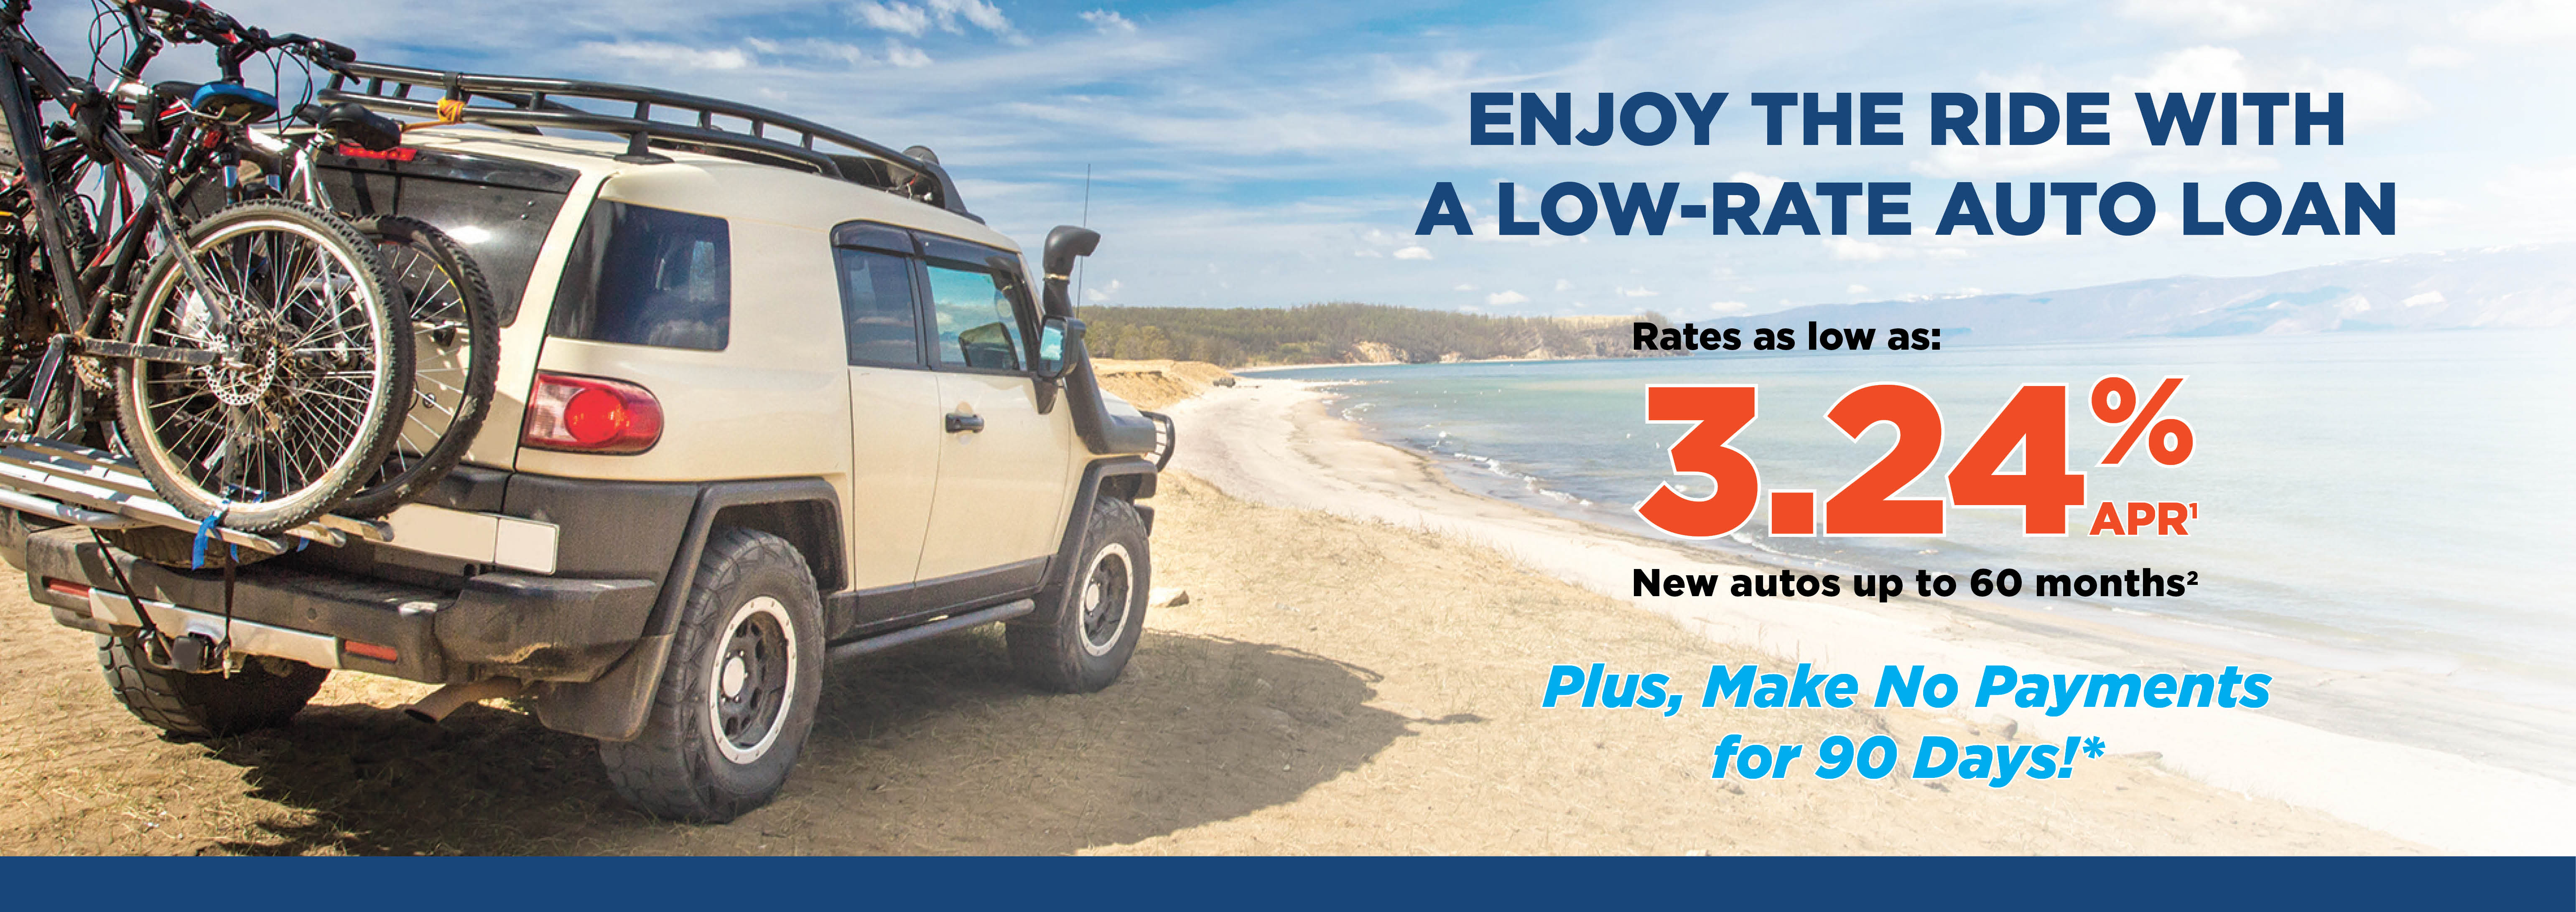 Enjoy the Ride with a Low-Rate Auto Loan